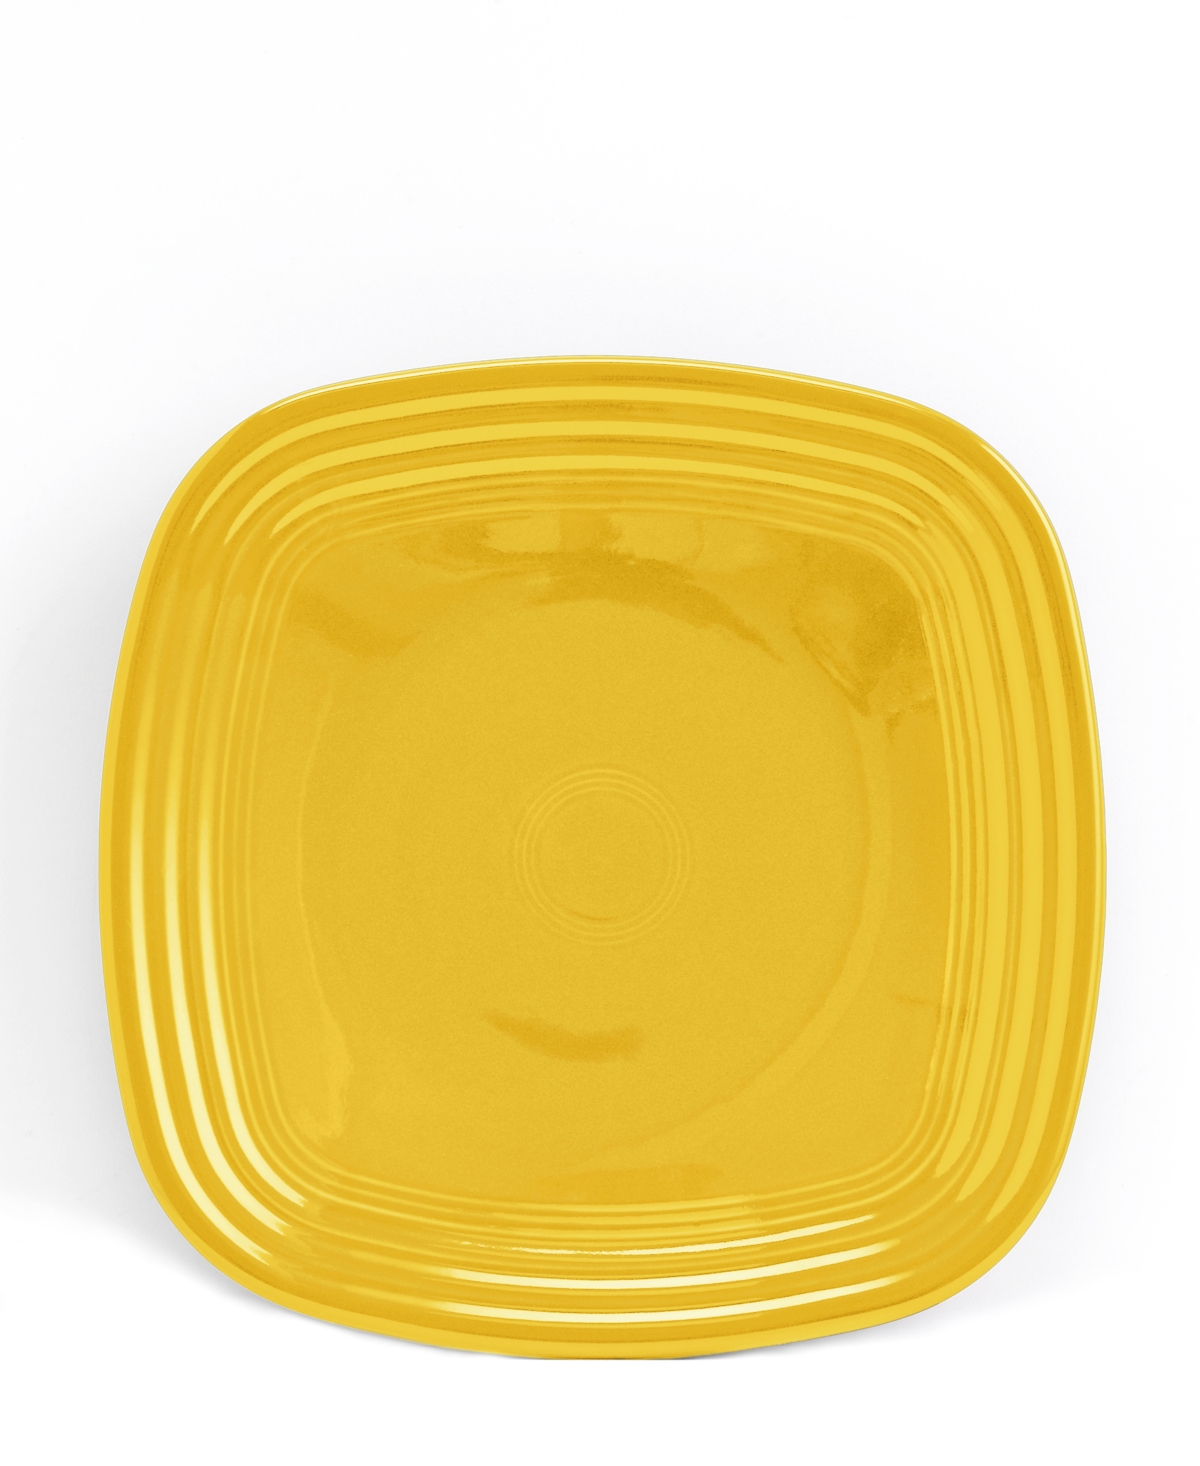 9.25" Square Luncheon Plate - Sunflower